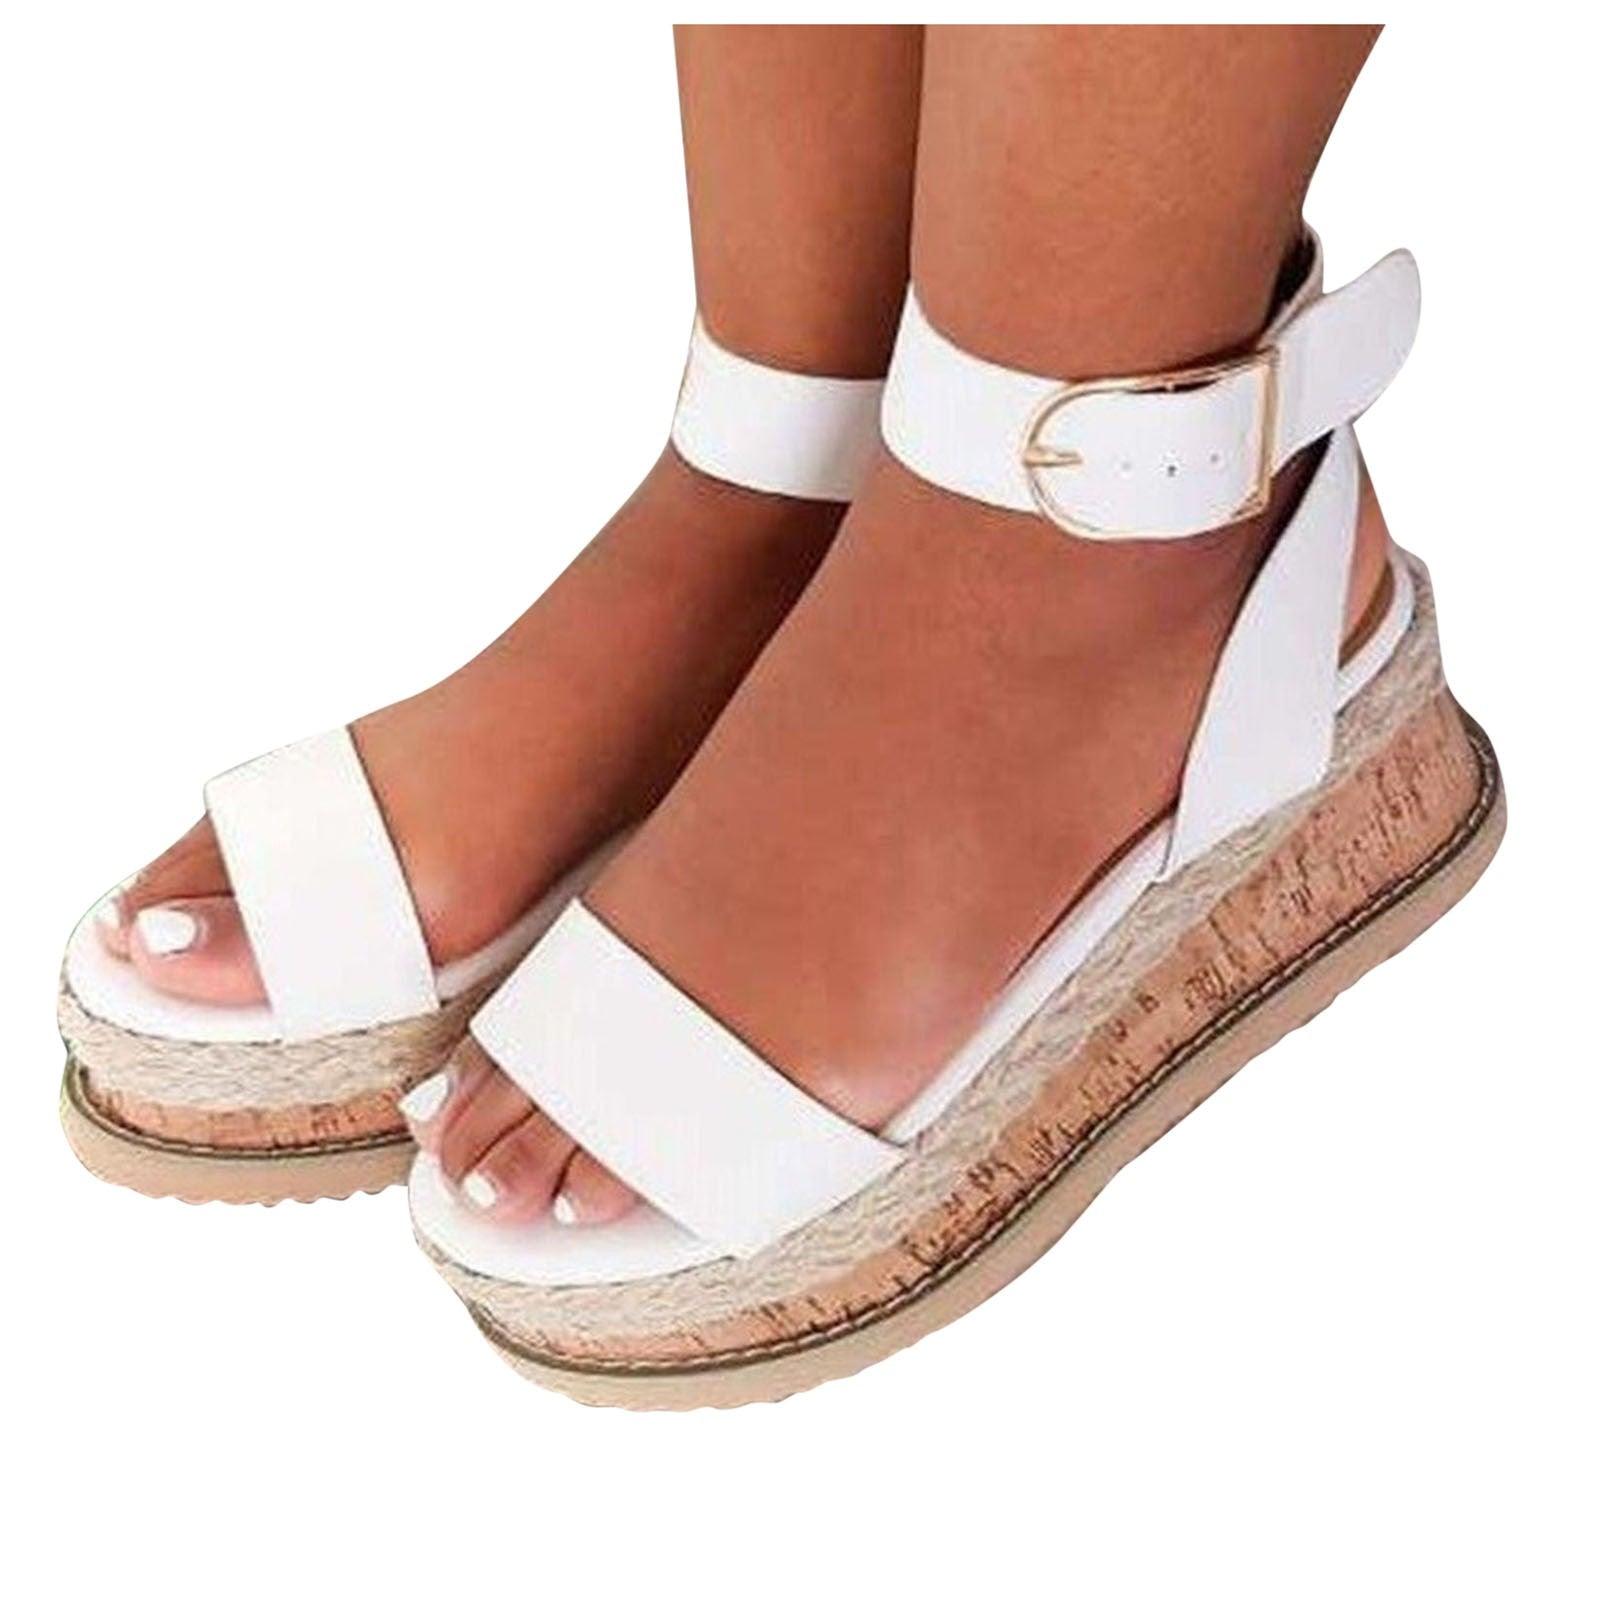 Sandals Women's Summer Shoes Breathable buckle Thick-soled Platform Wedges Slip-on Casual Roman Female Sandals